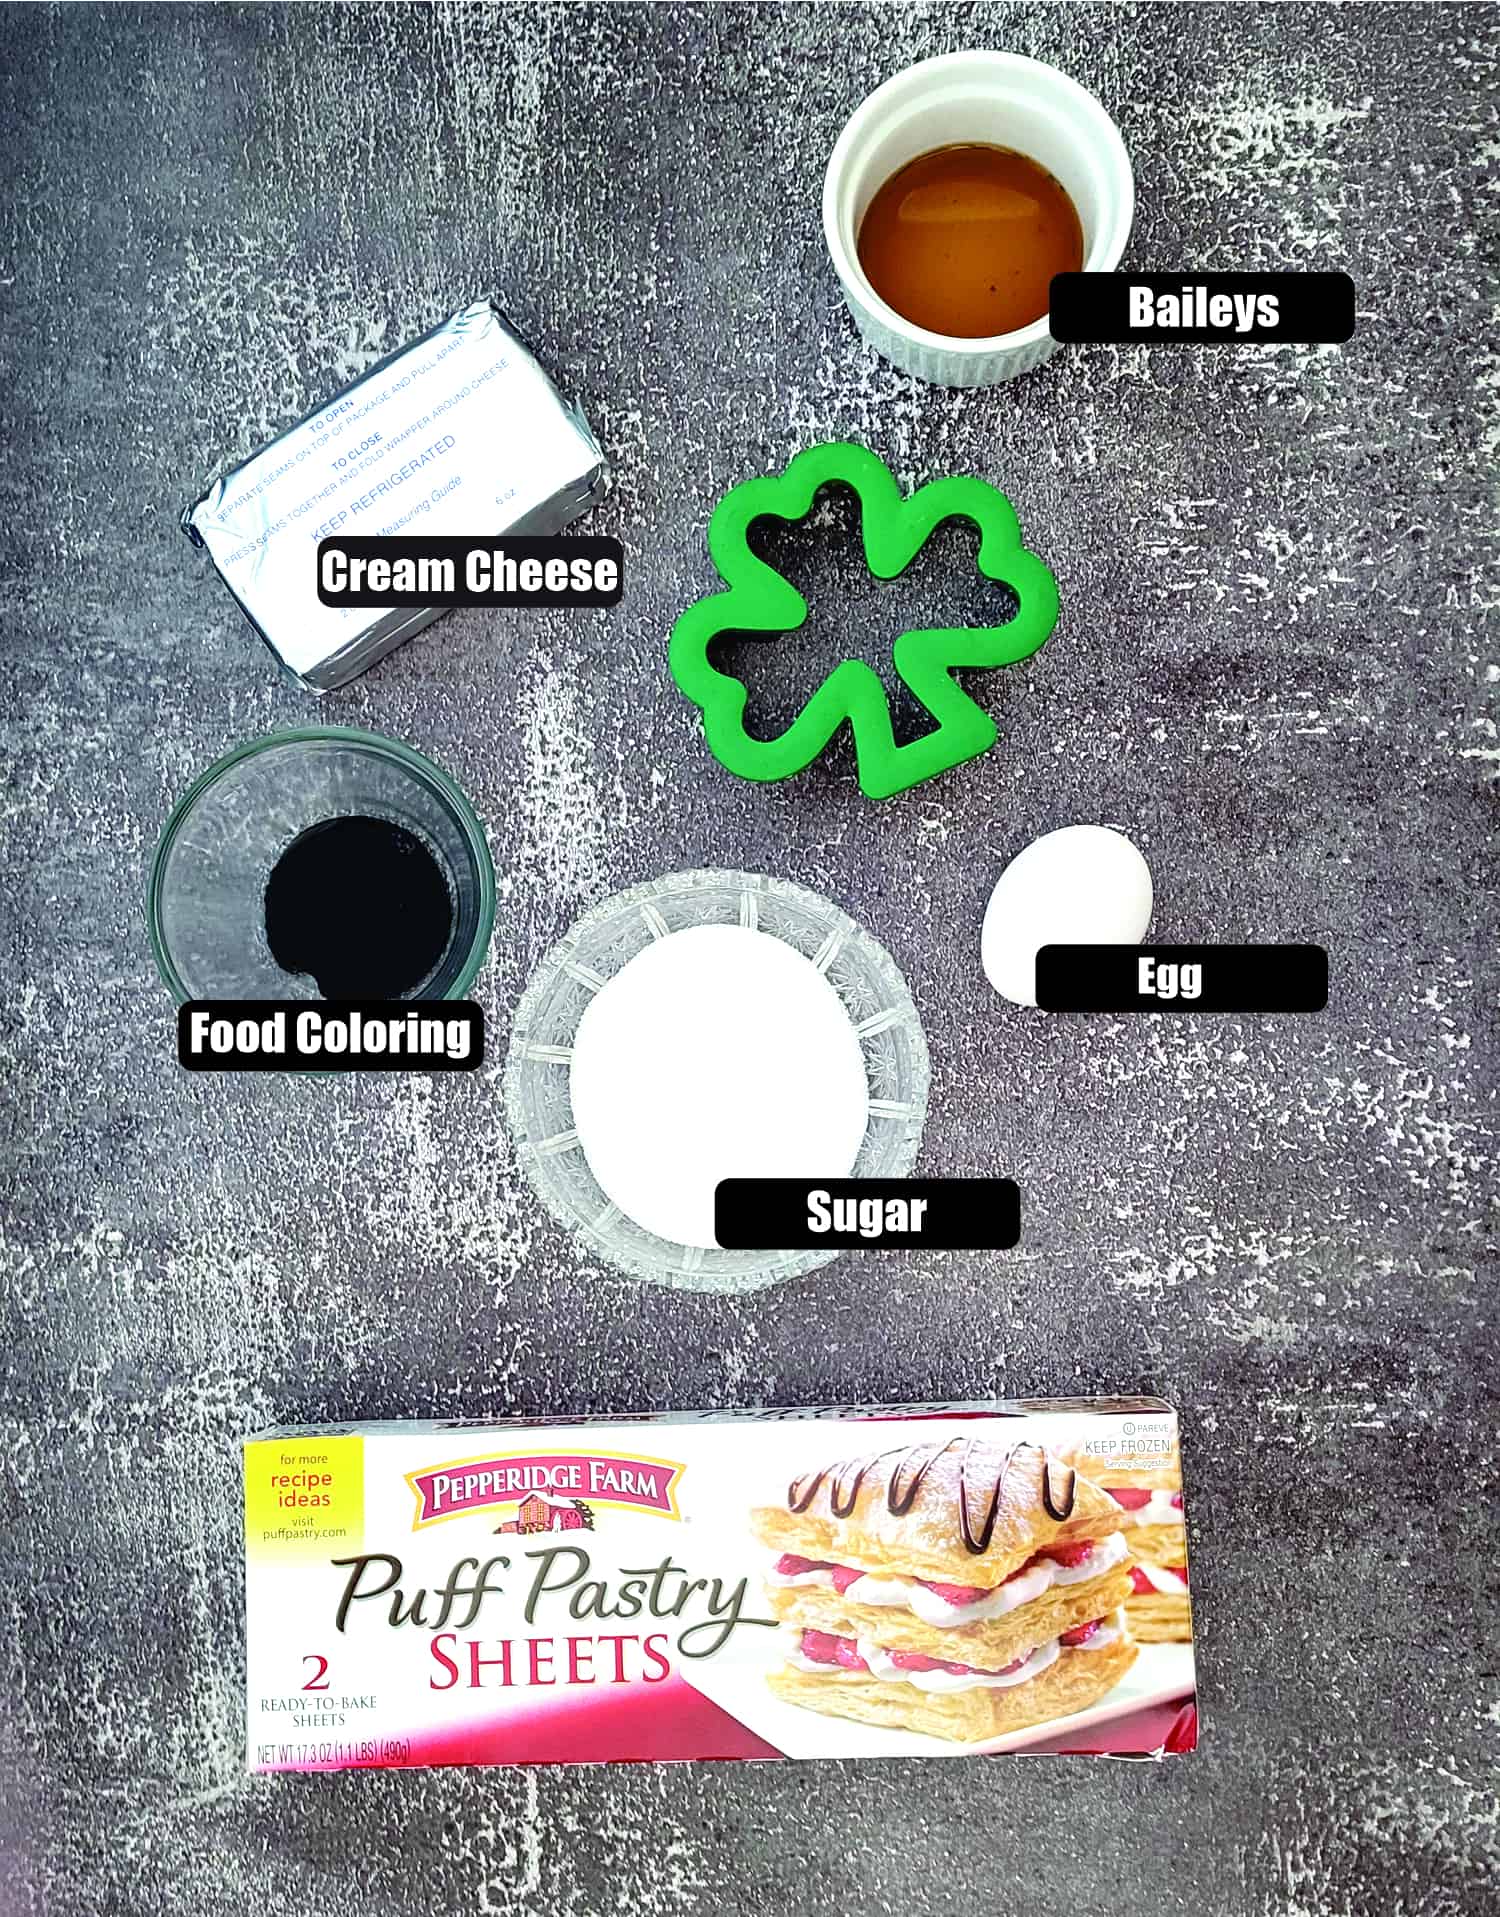 ingredients needed to make puff pastry Baileys shamrocks for St. Paddy's day